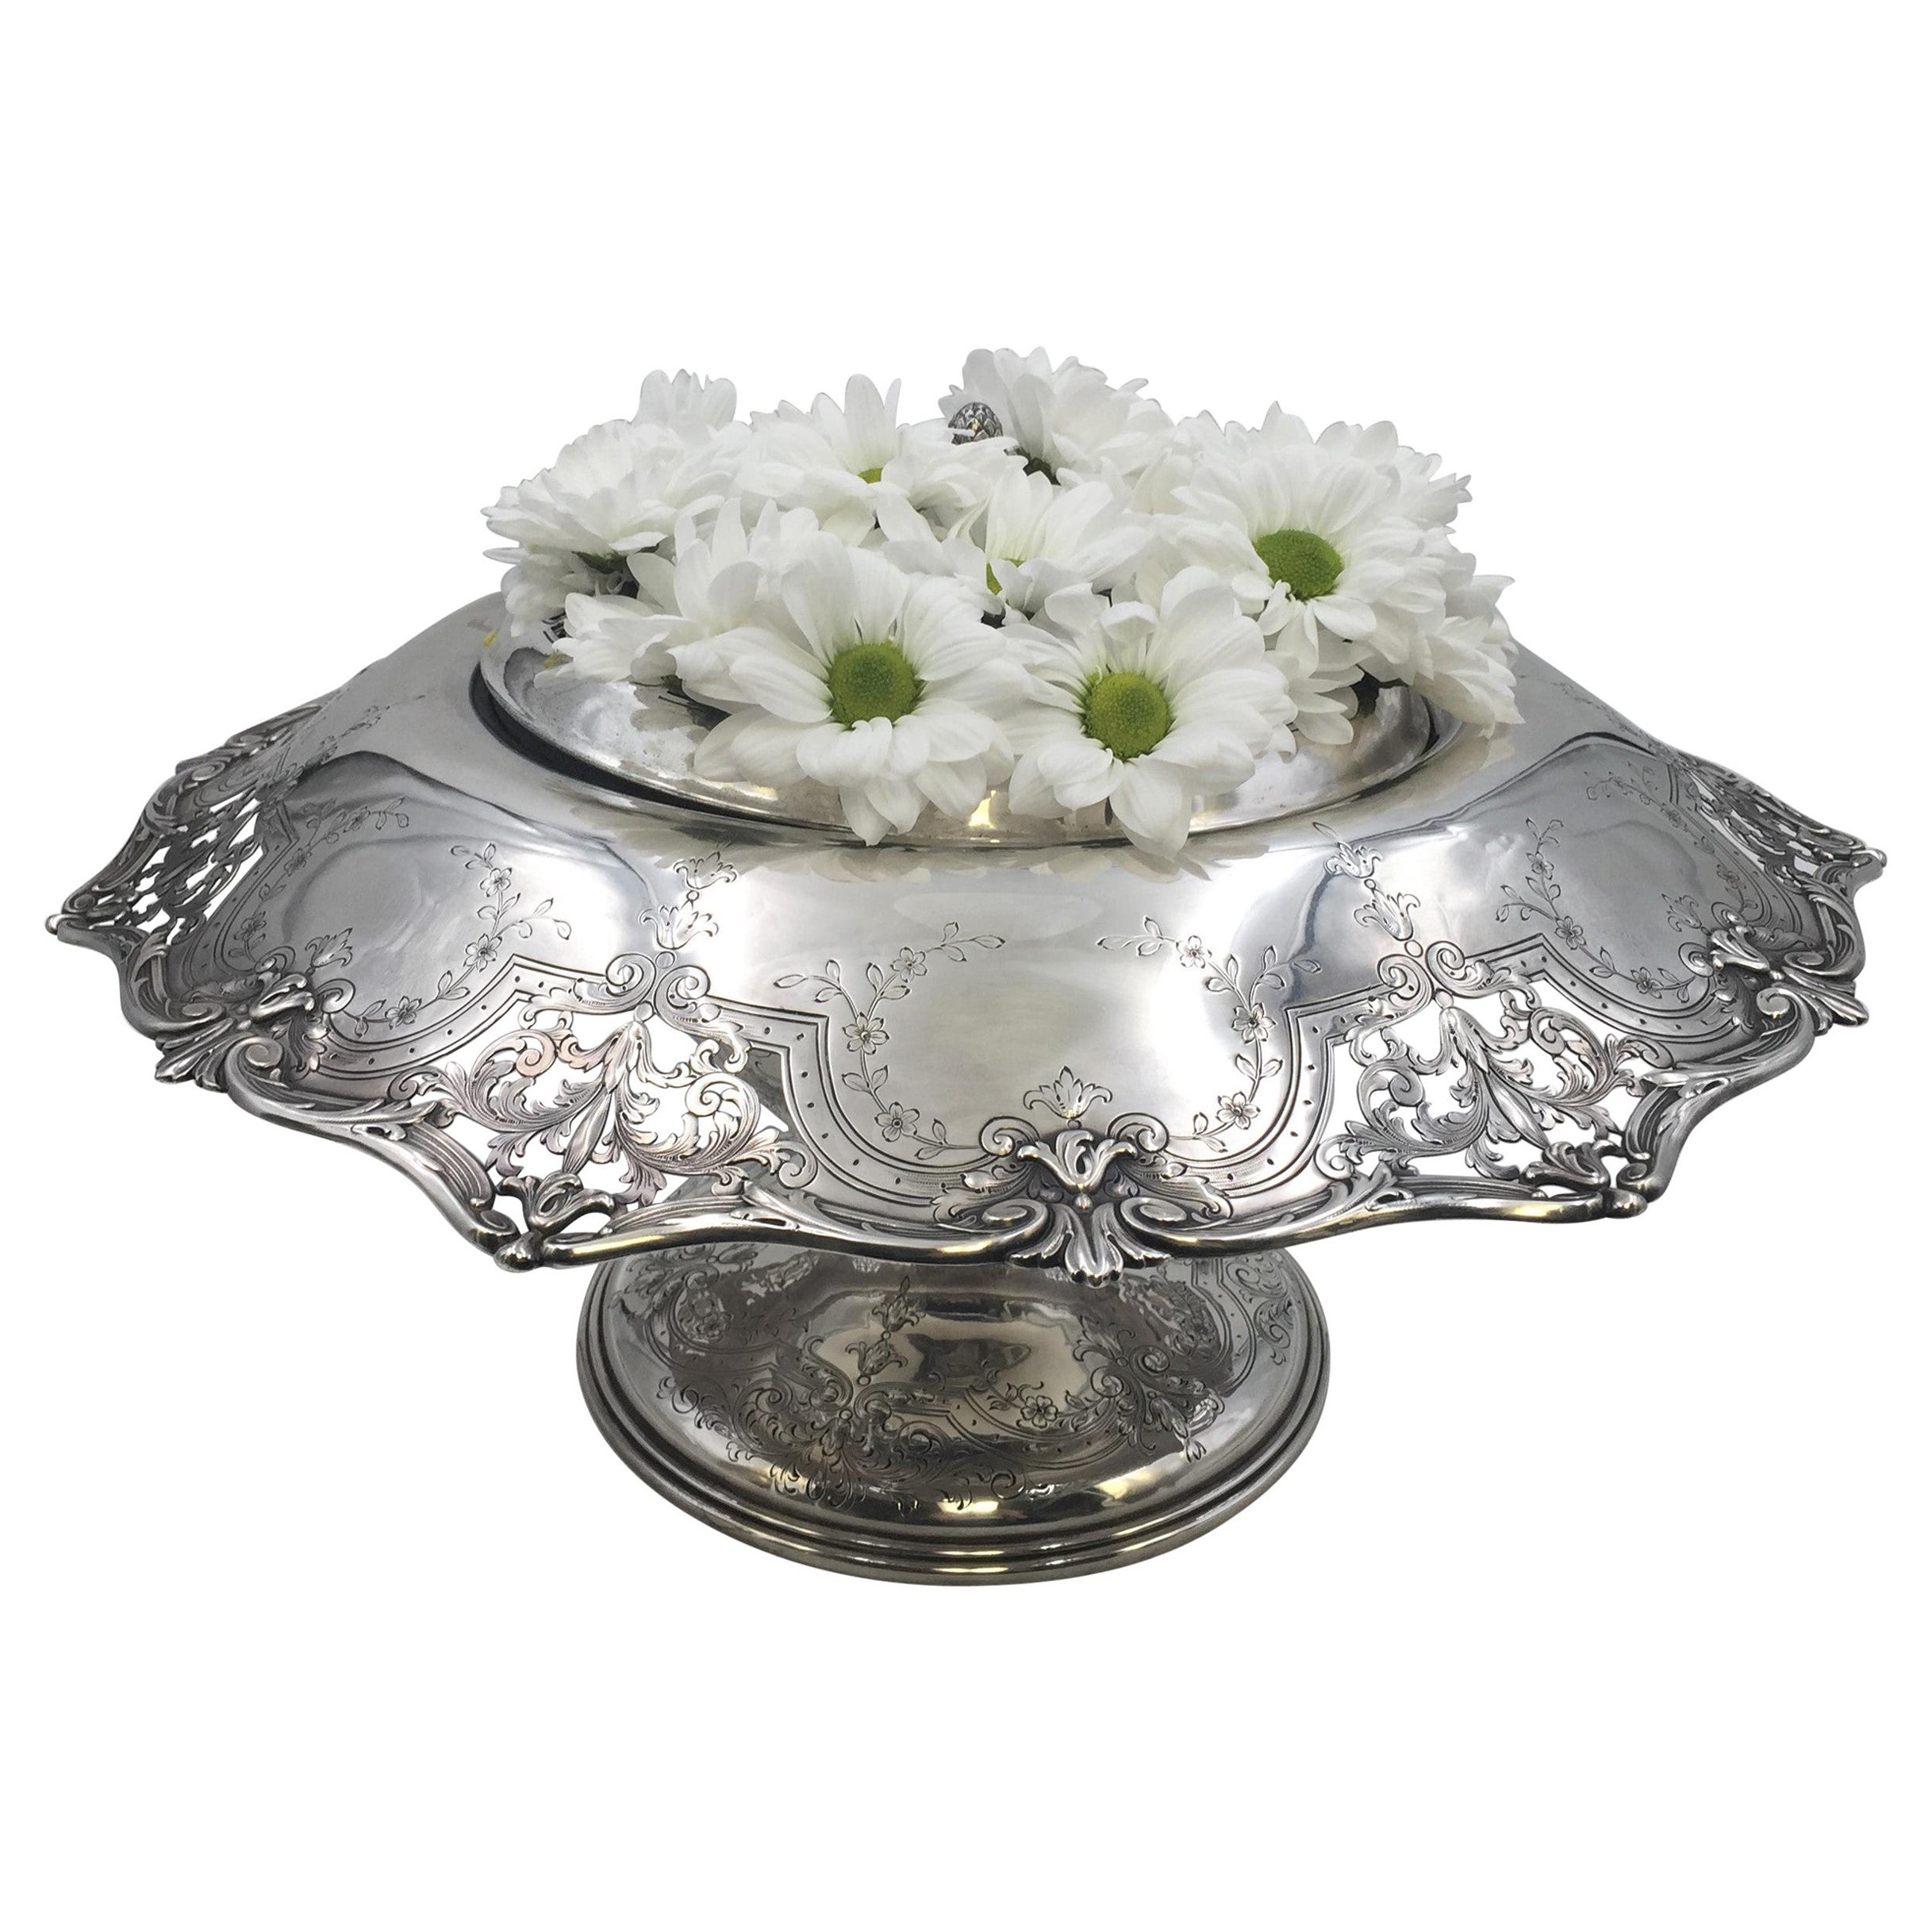 Graff, Washbourne &Dunn Sterling Silver Rose Bowl Centerpiece Early 20th Century